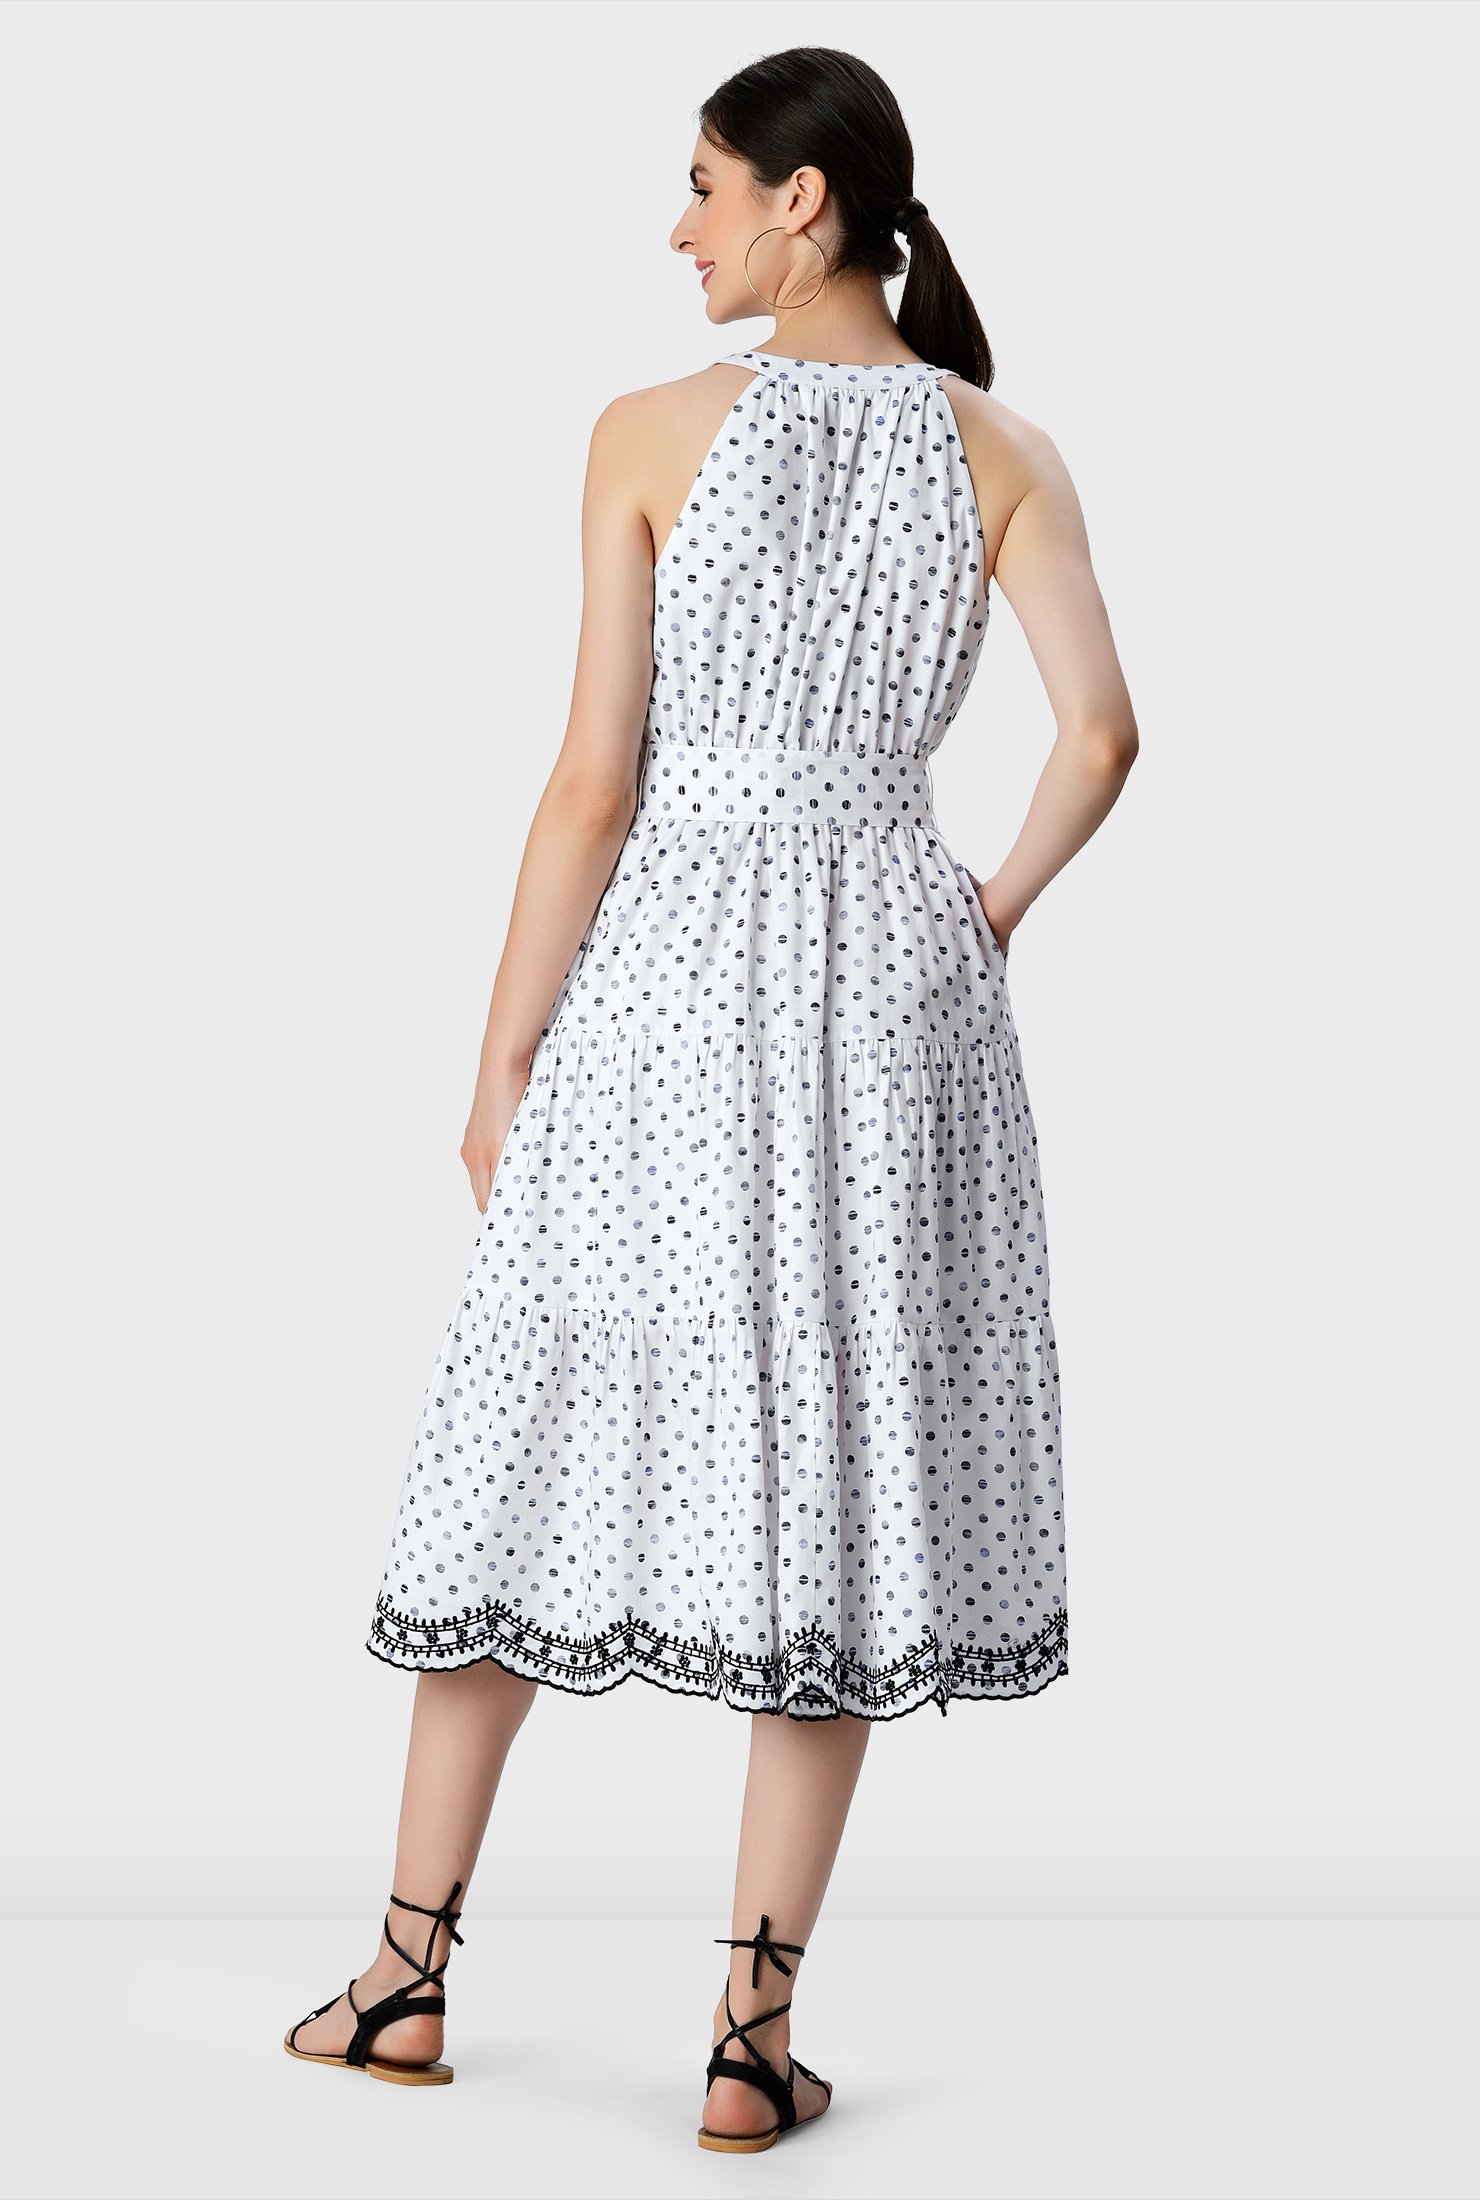 Fresh as the season itself, our happy polka dot print cotton elevates the everyday with eye-catching details like embellished scallops at the swingy hem.